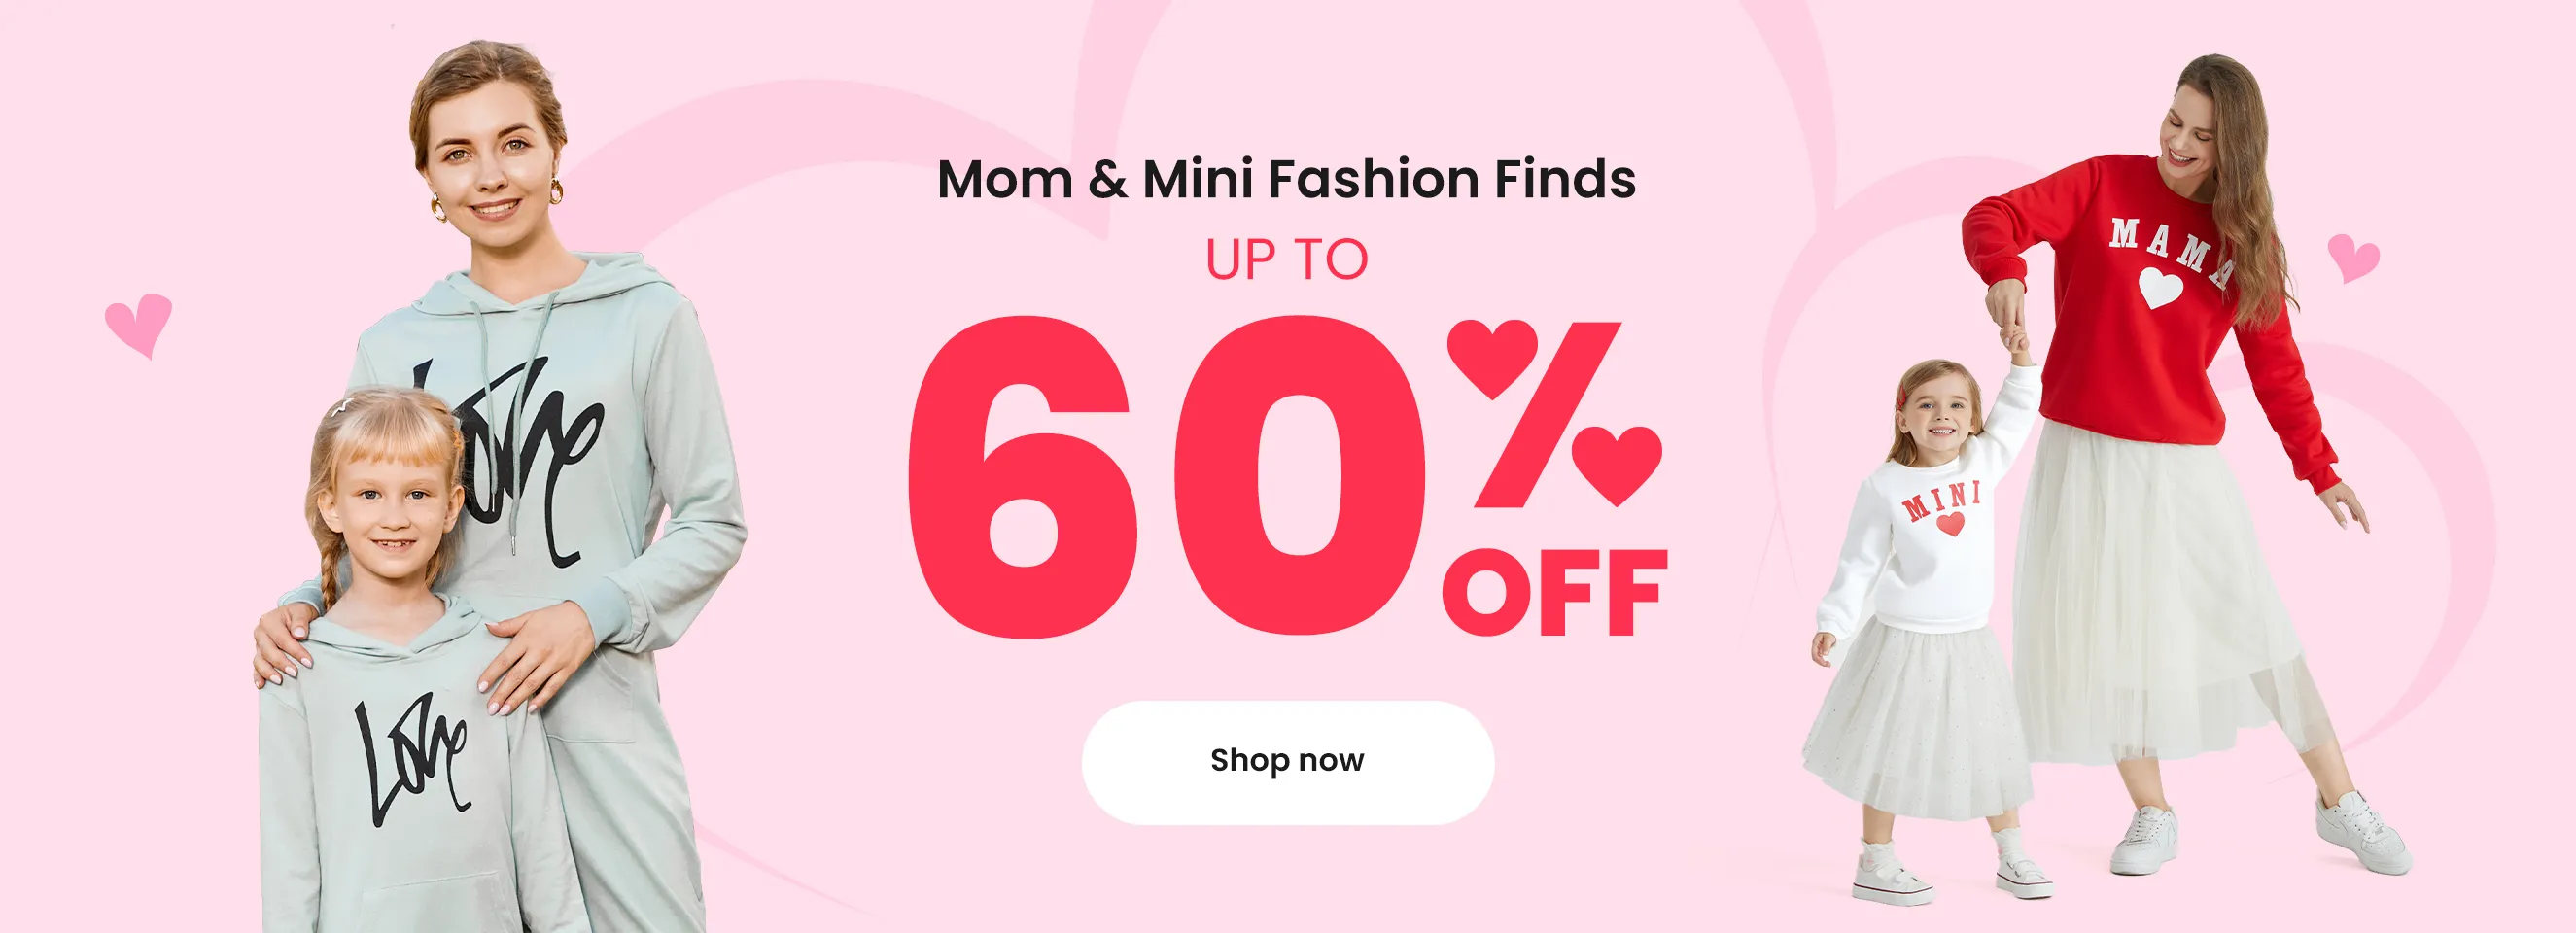 Click it to join Mom & Mini Fashion Finds activity